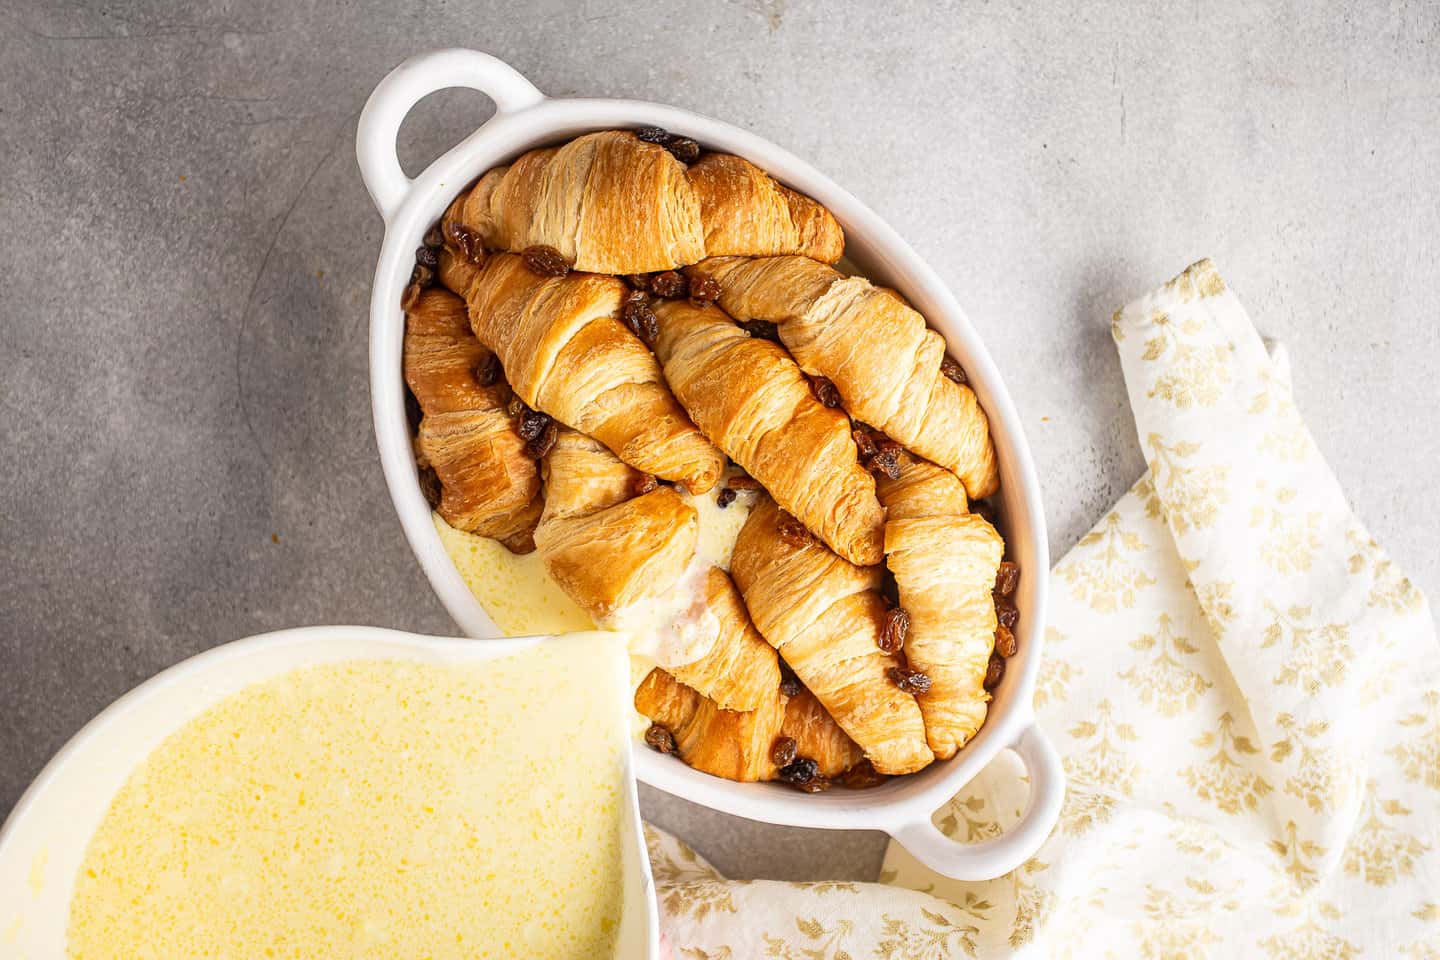 Pouring custard over croissants.